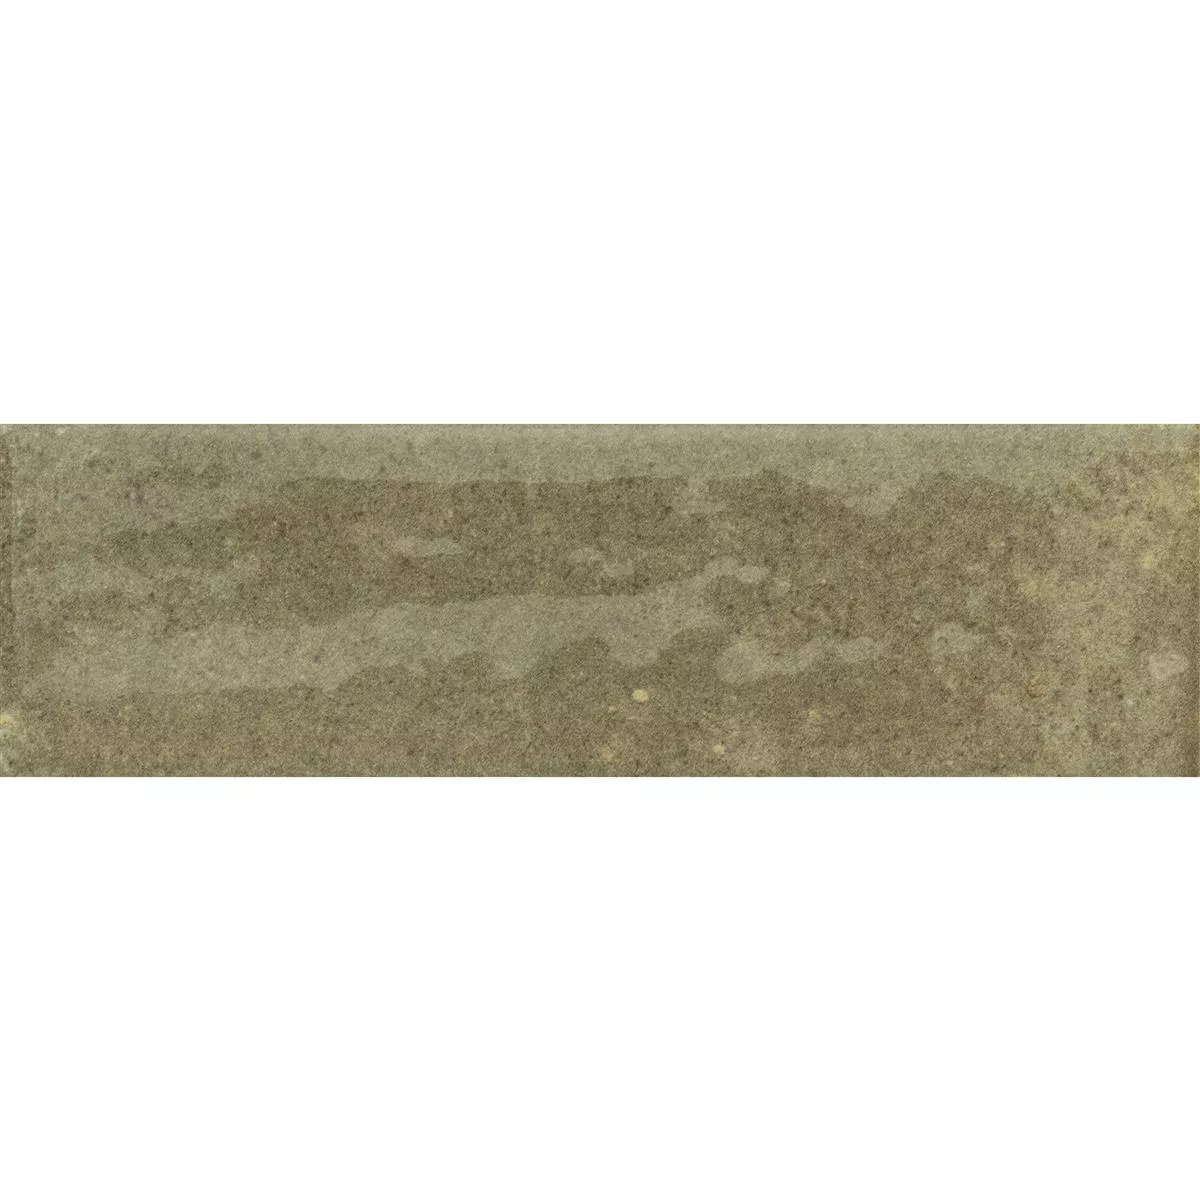 Wall Tiles Arosa Glossy Waved Olive Green 6x25cm